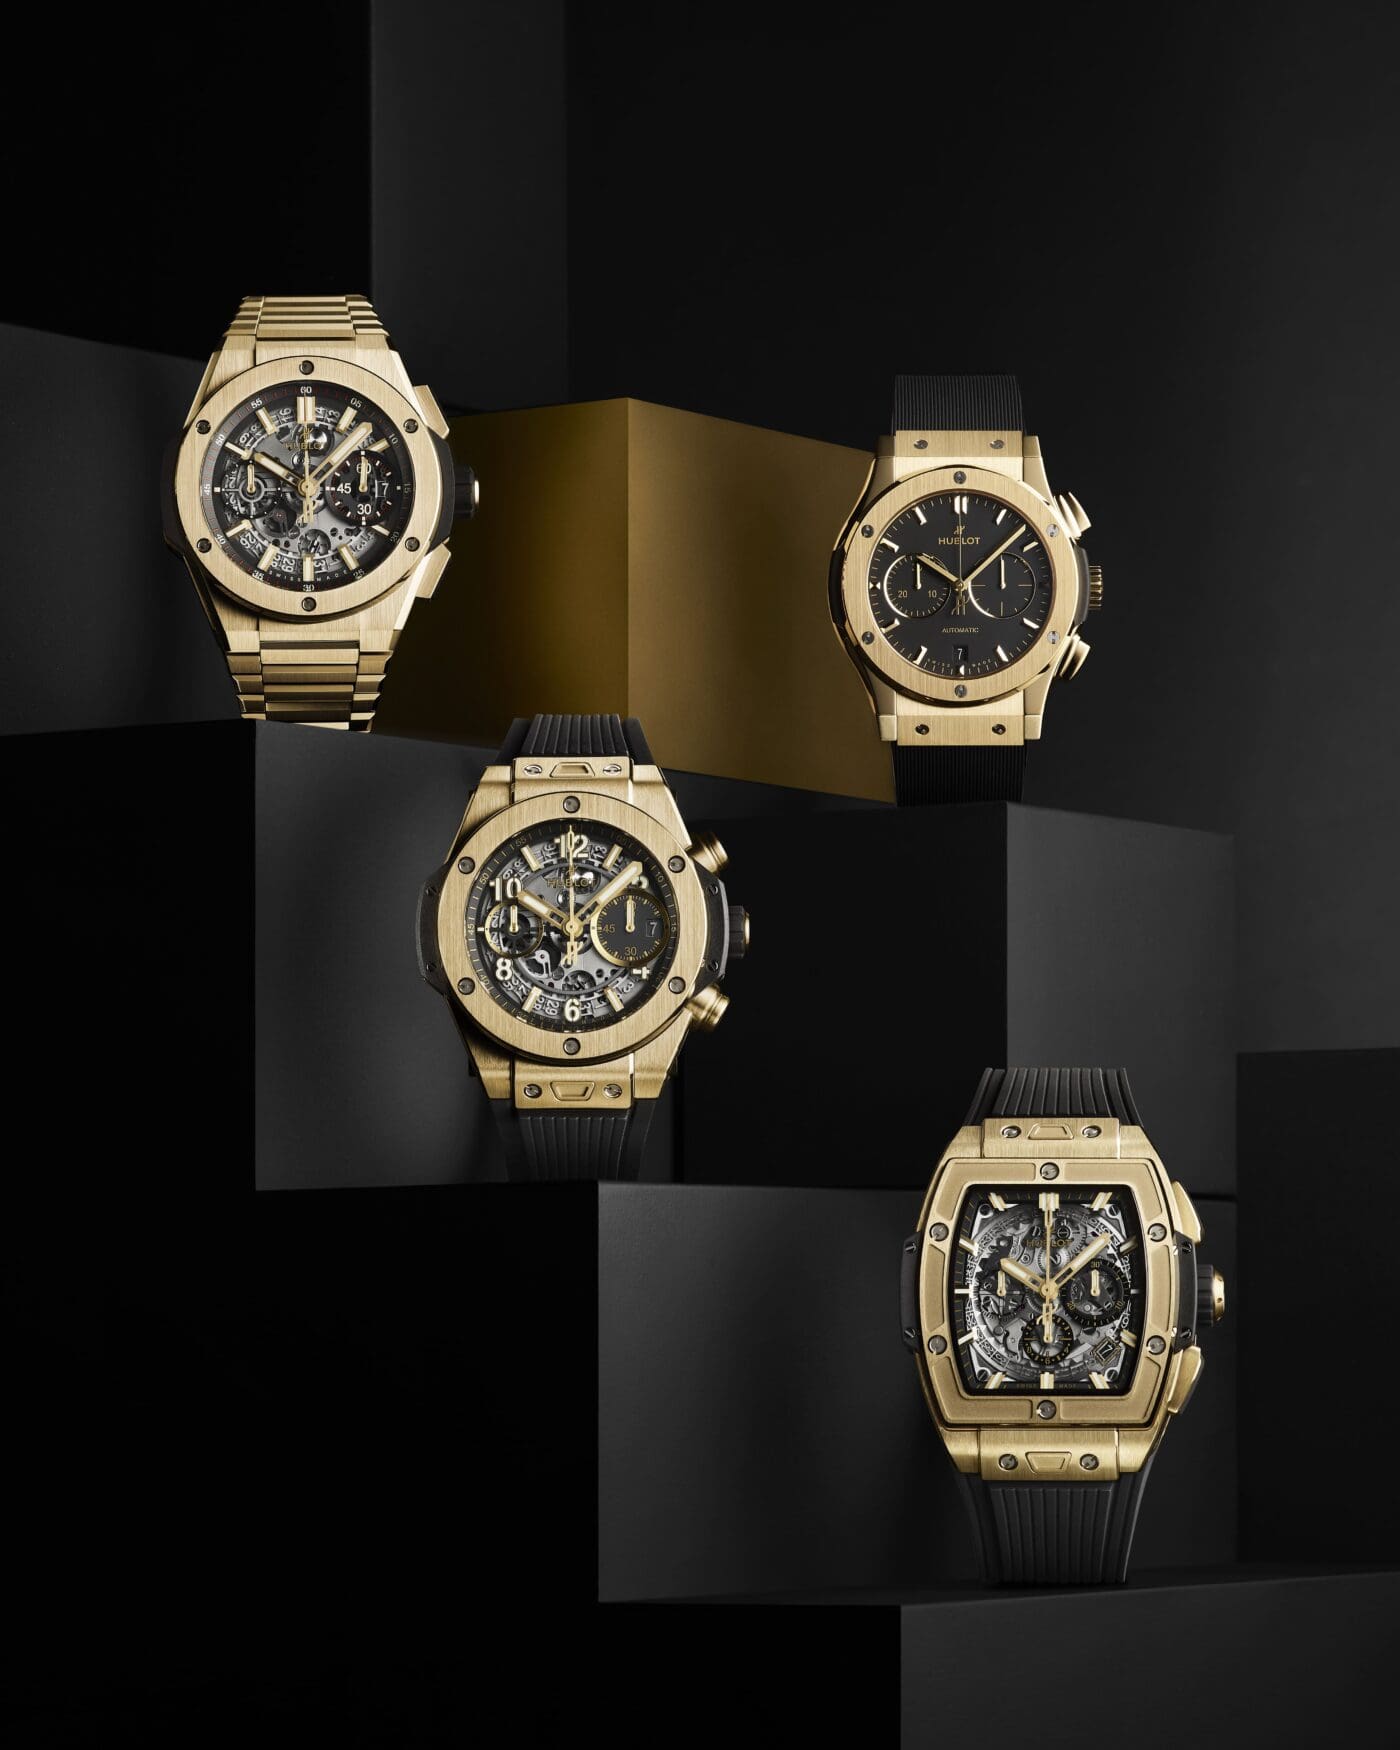 The Hublot Yellow Gold collection is a return to the brand’s trailblazing roots